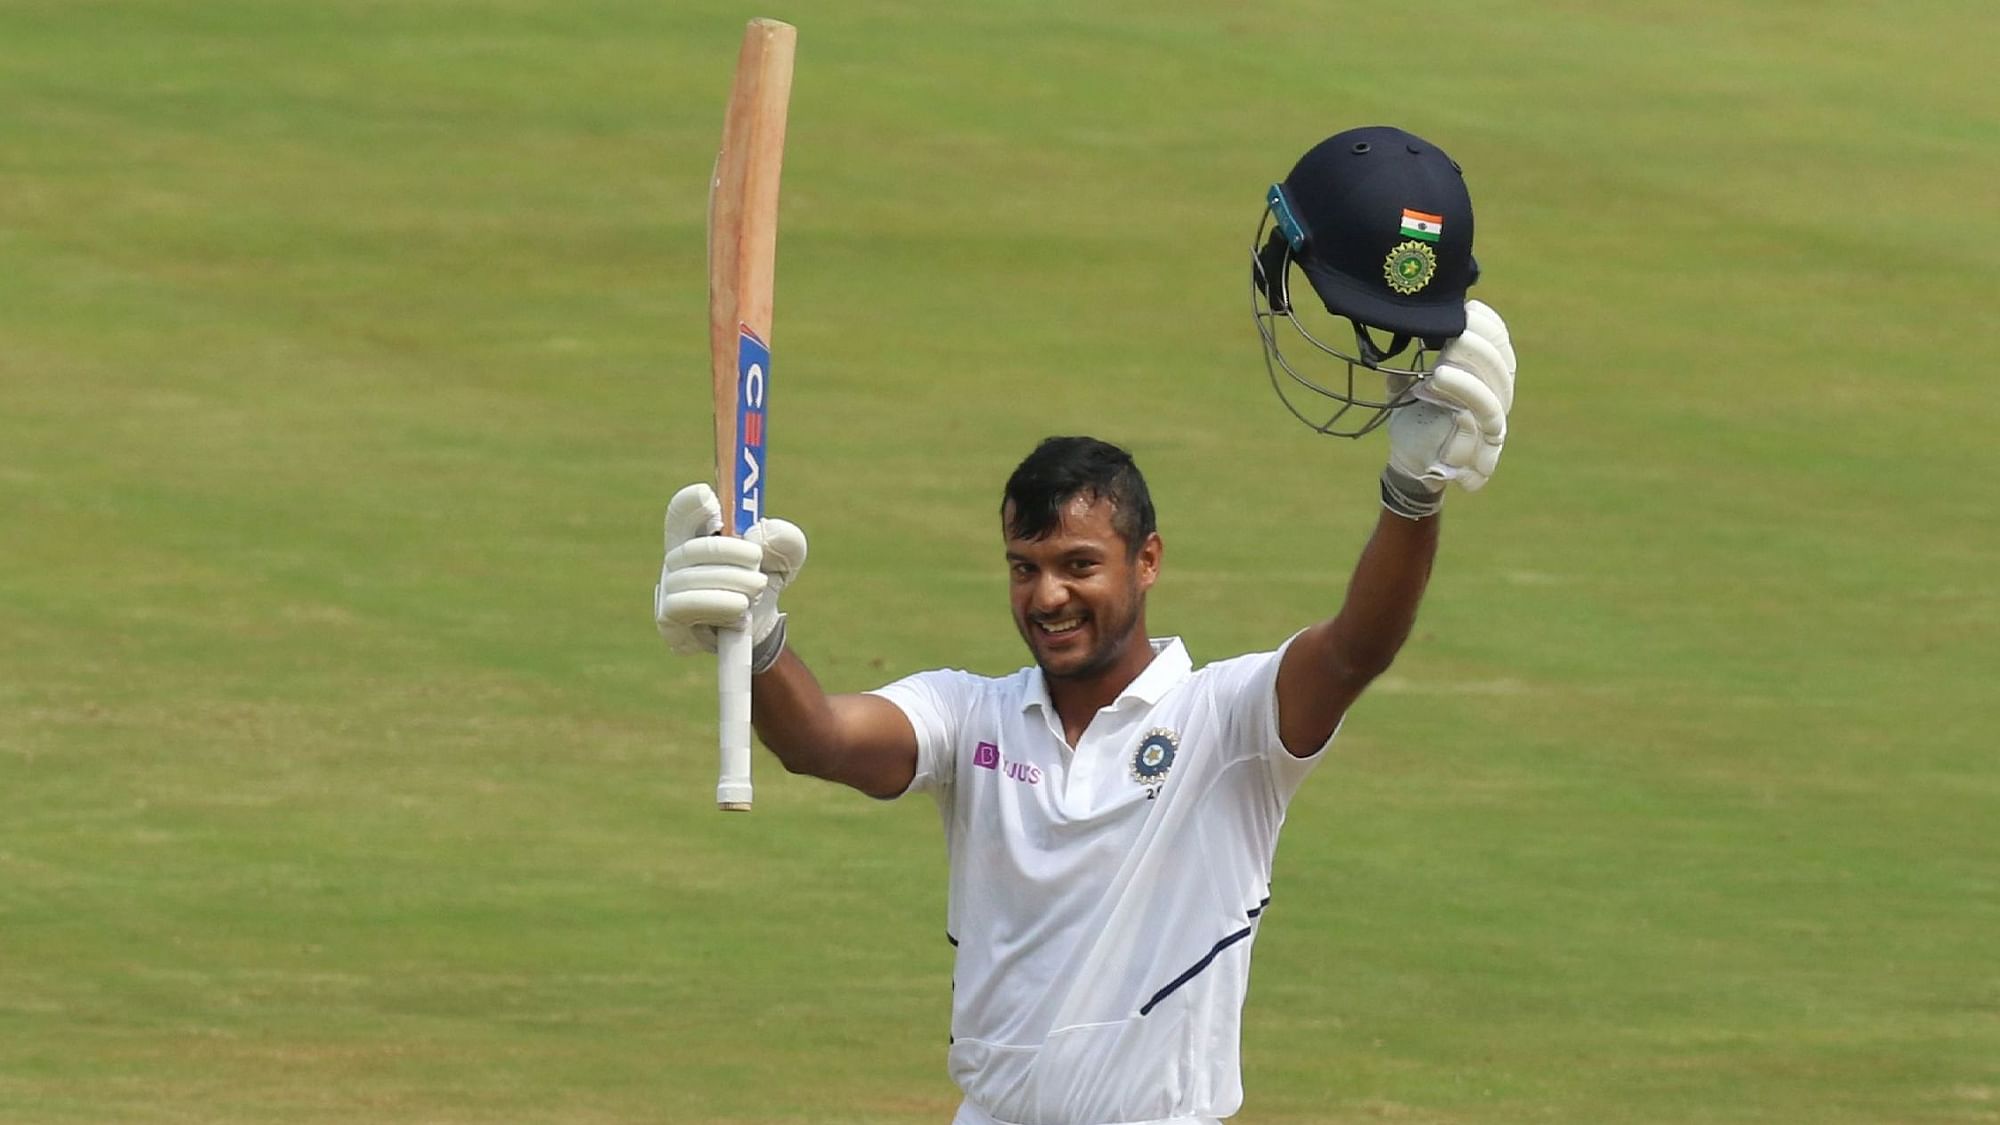 Opener Mayank Agarwal notched-up his maiden Test century in his first innings at home.